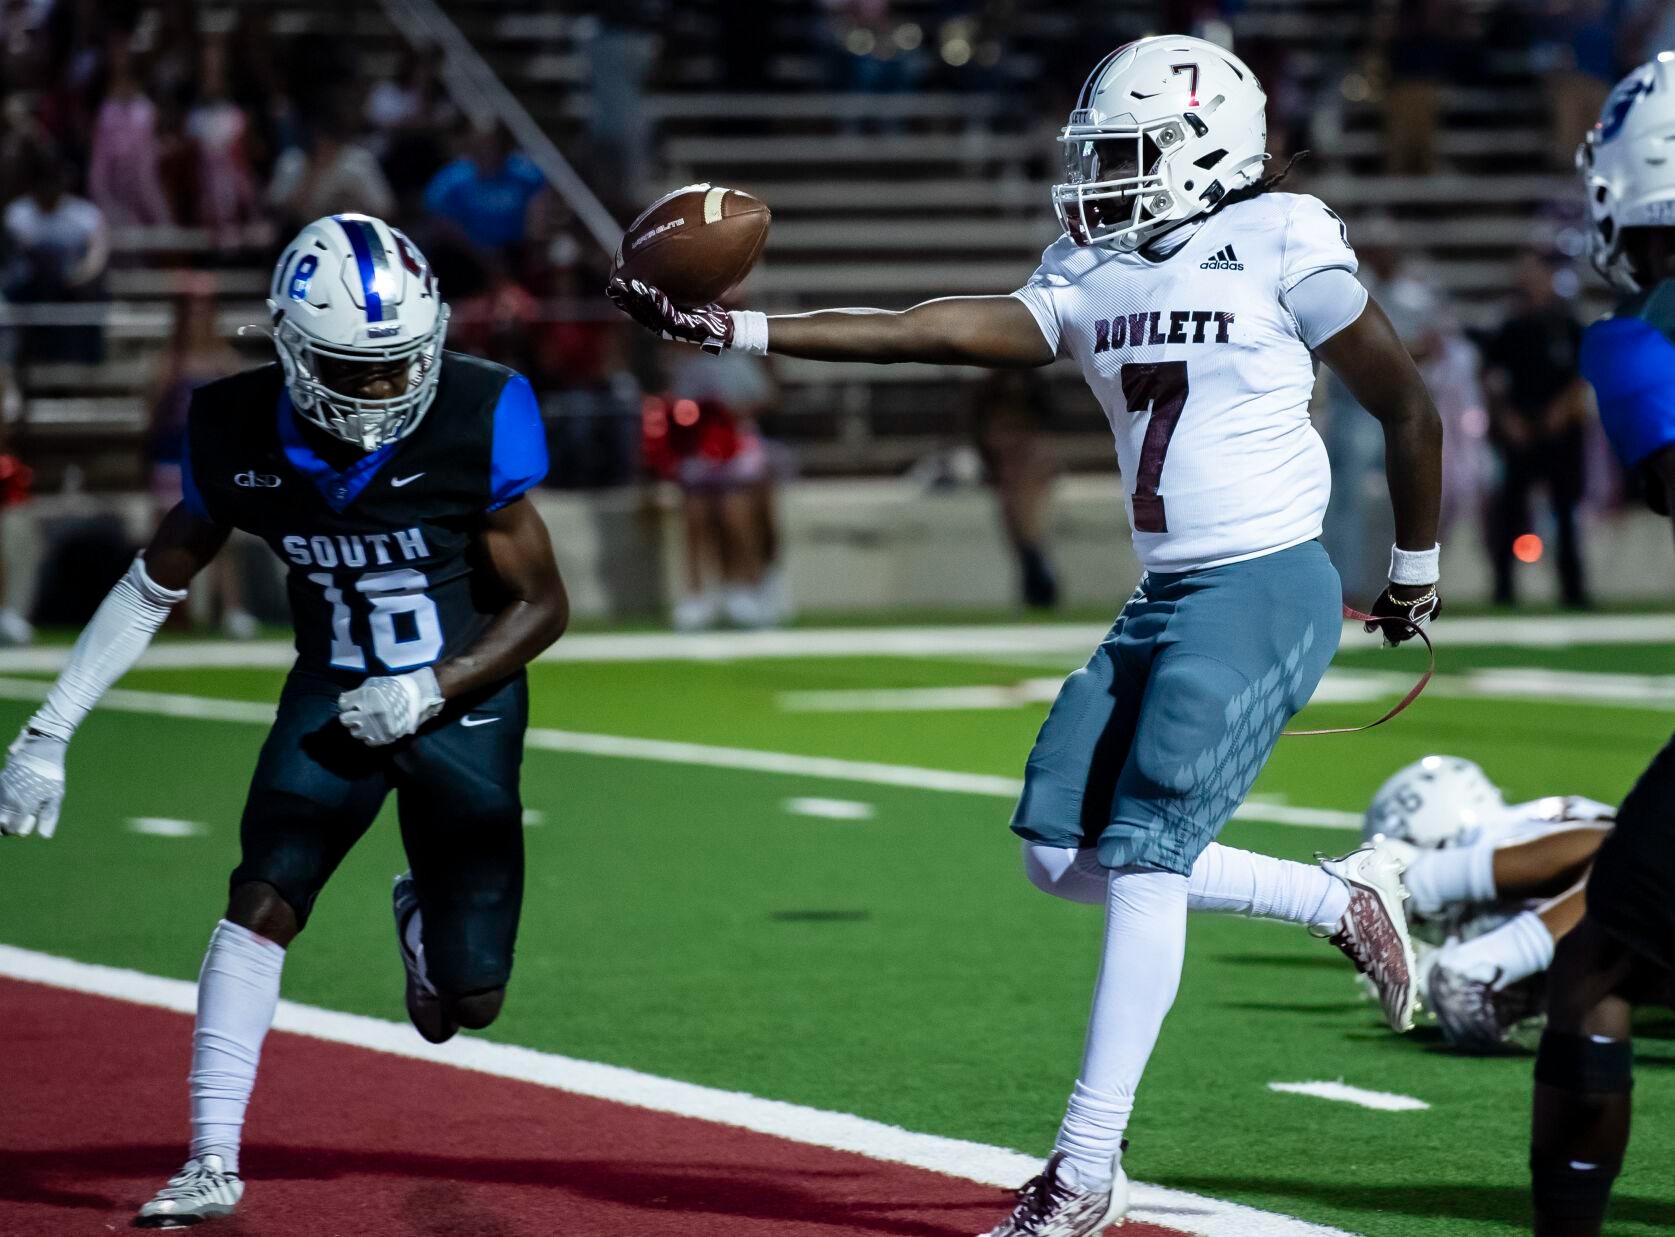 Rowlett wide receiver Cordell Lee strolls into the zone to complete a 3-yard touchdown during the Eagles’ 41-14 victory over South Garland on Friday at Homer B. Johnson Stadium. Photo Courtesy of Brad McClendon, bhmimages.com